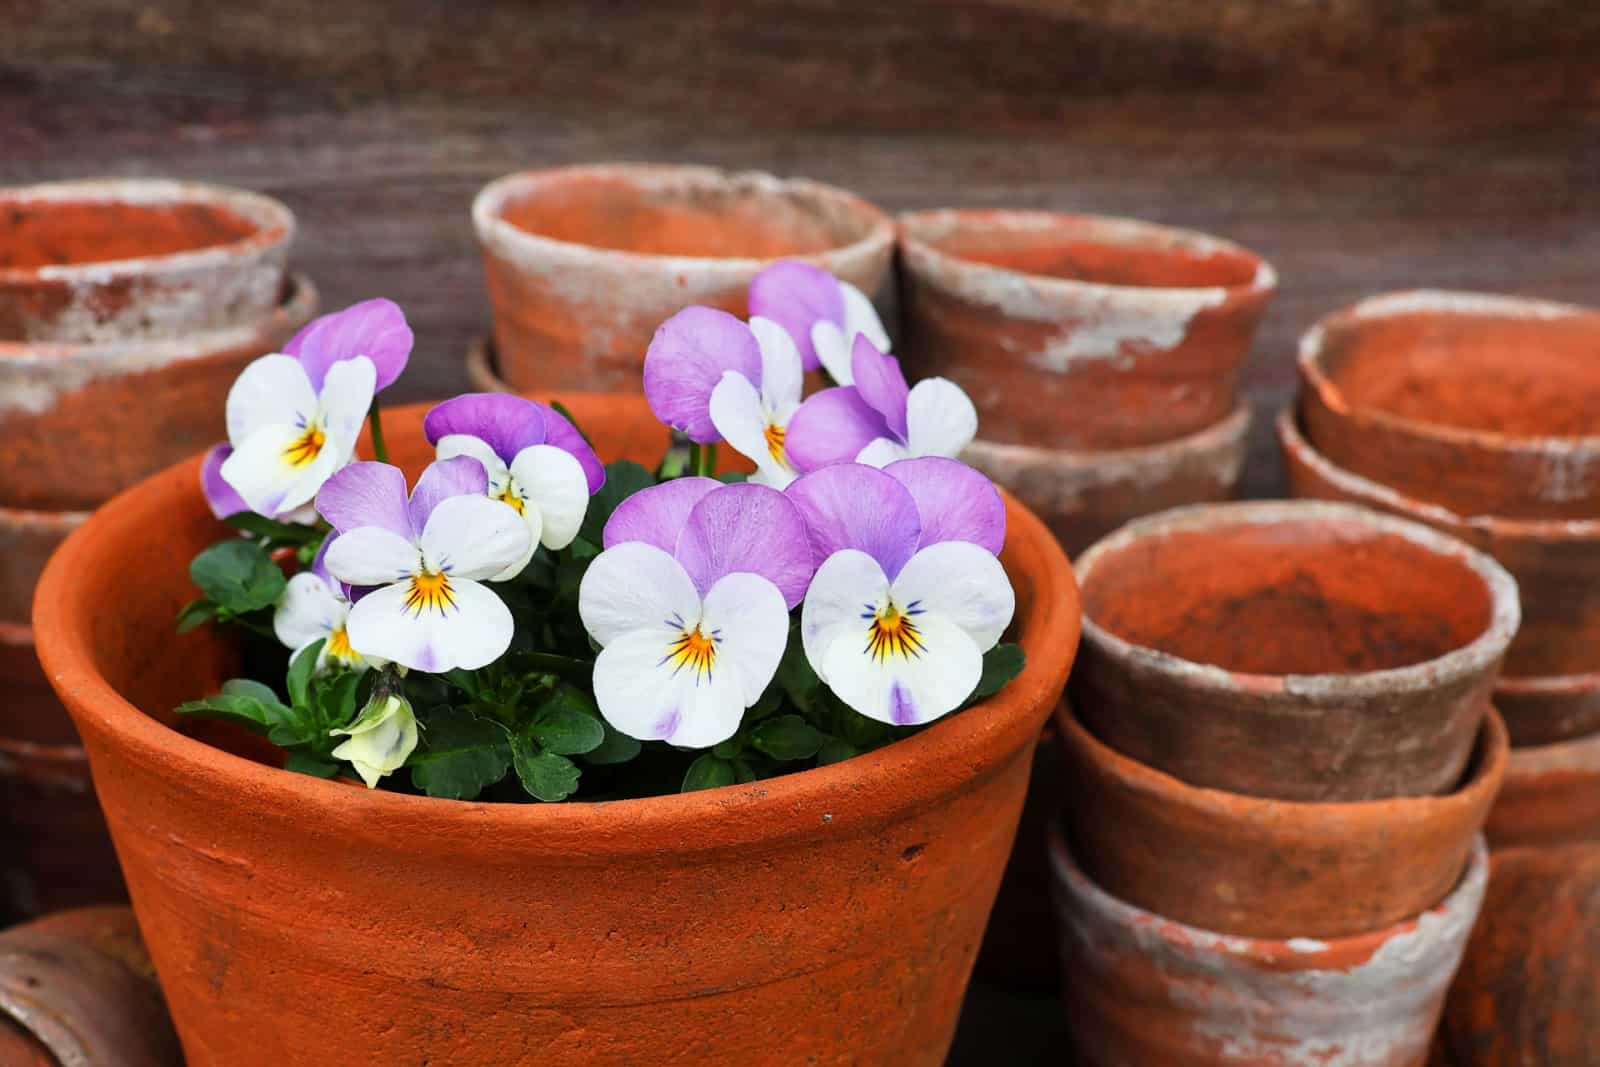 8 Things You Should Know About Terracotta Pots Before Buying Them